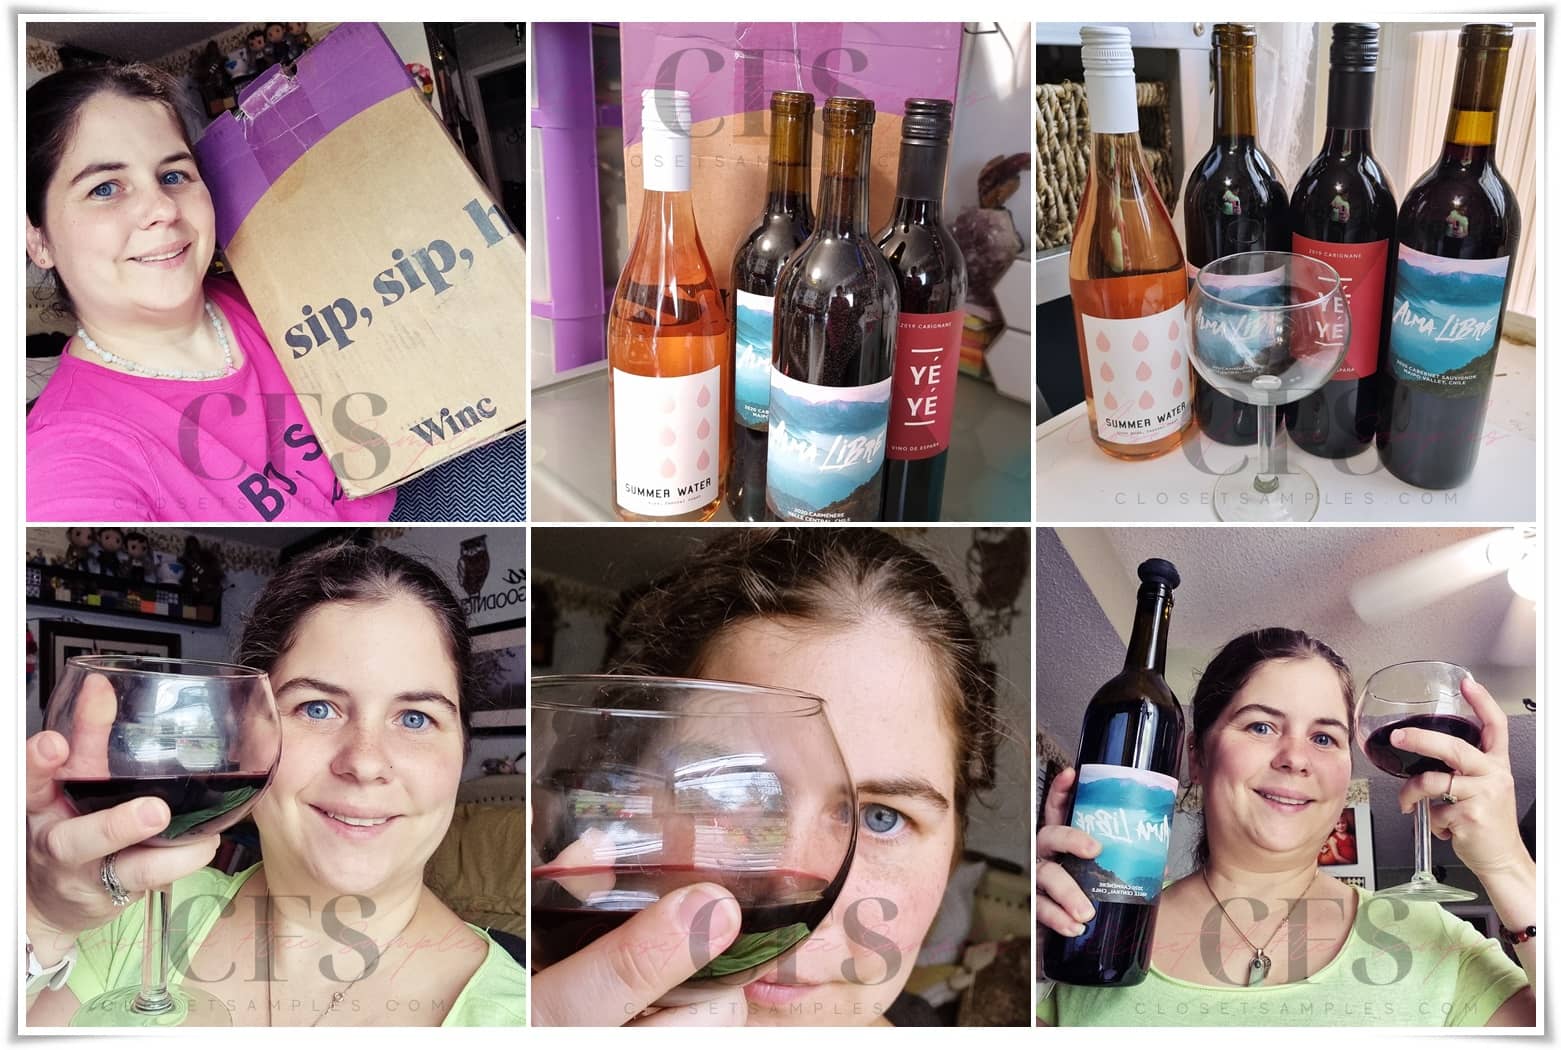 Surviving Post Hurricane Ida with Winc Wine Review closetsamples collage